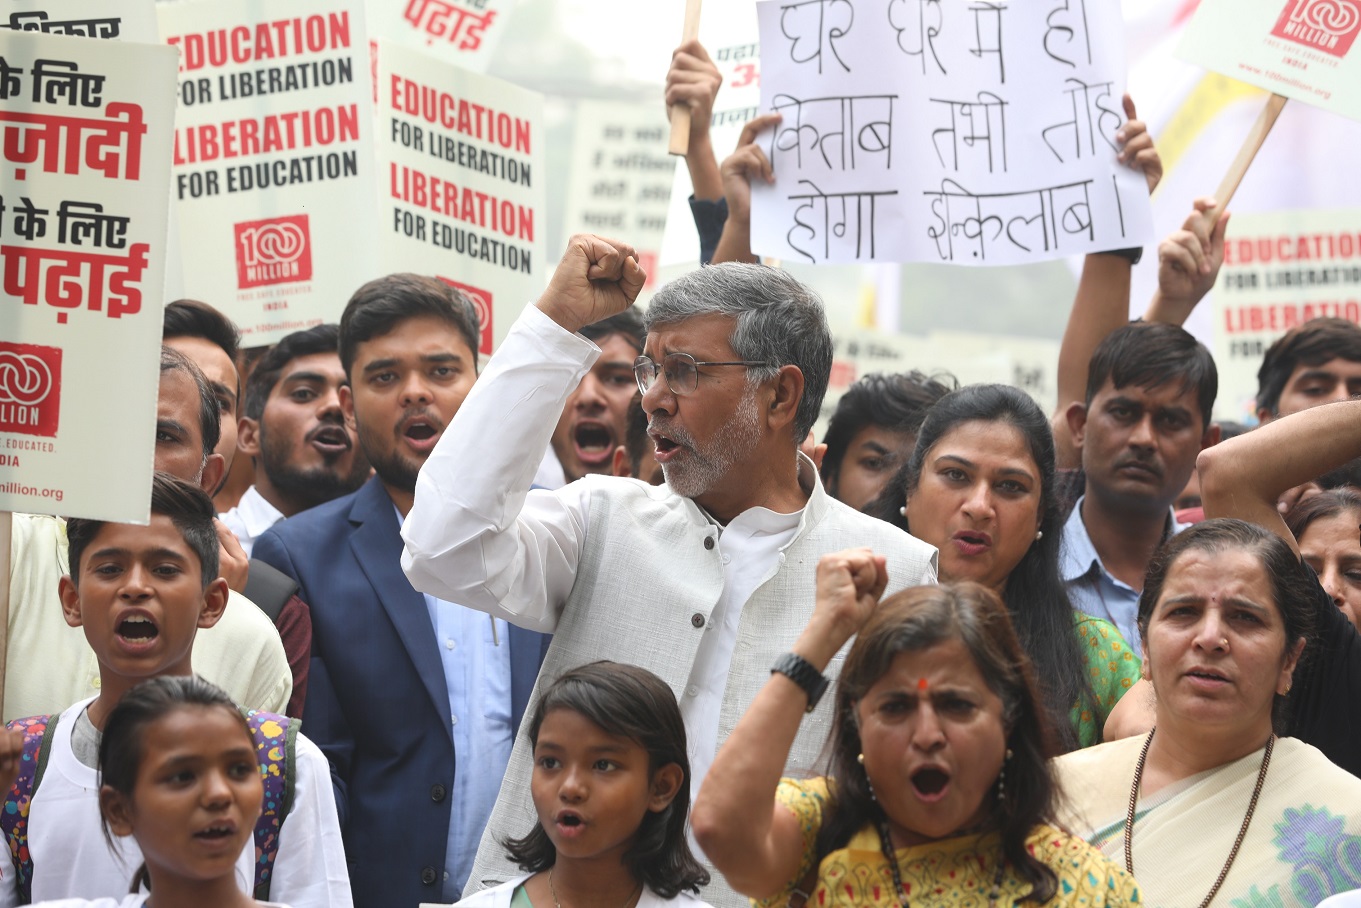 Mr Satyarthi today at the march for Free, Safe and Educated Childhood